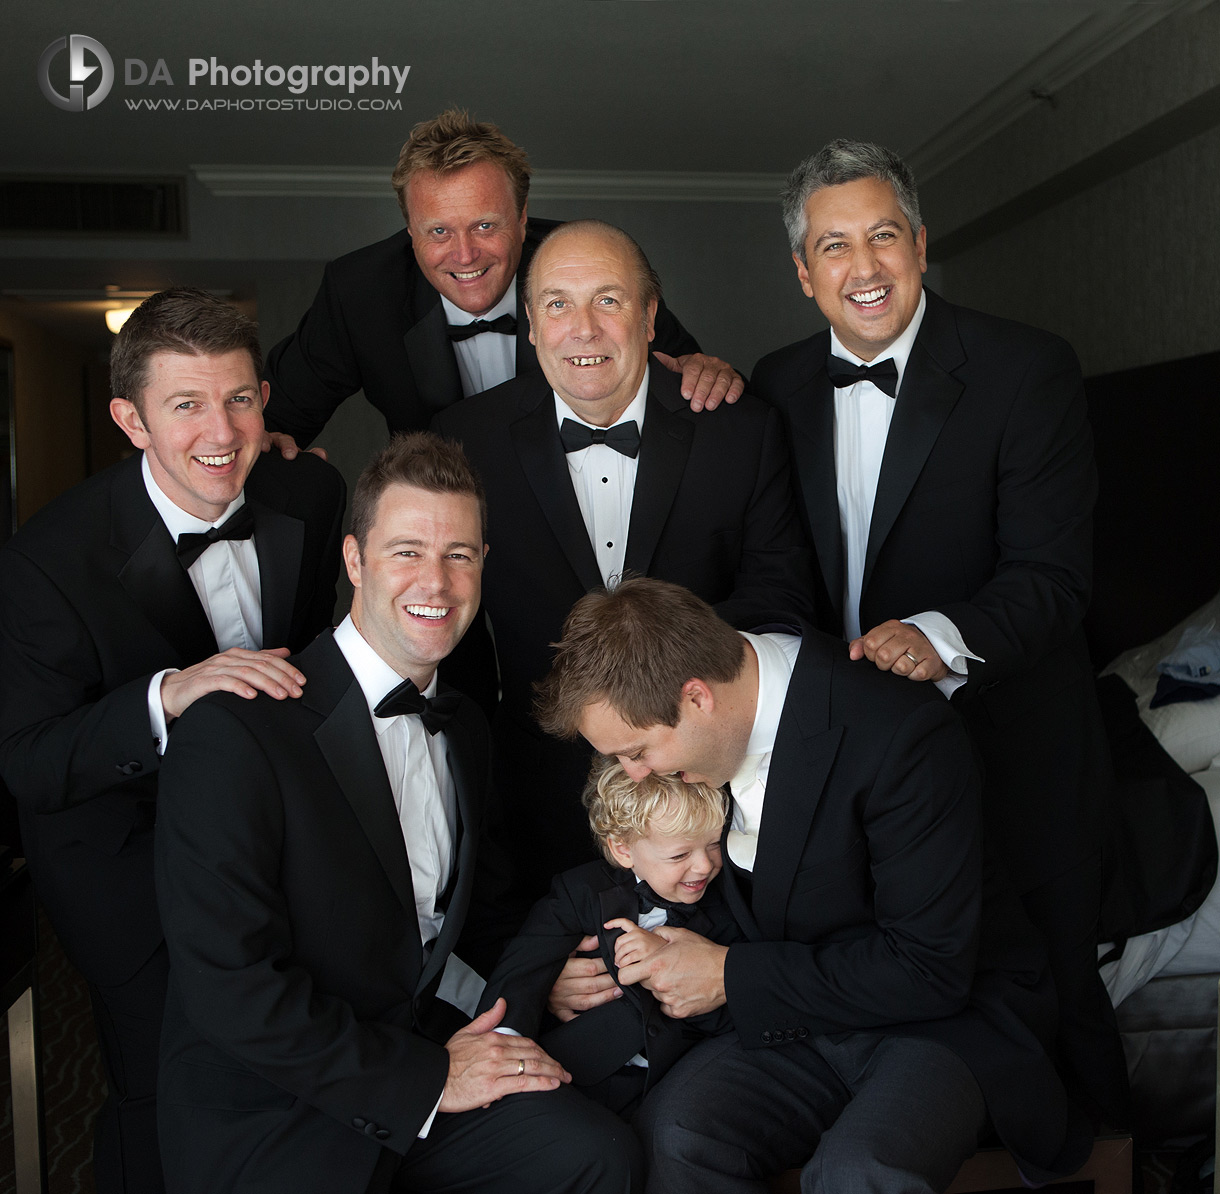 The fun withe the groom with his groom mans My last Name - Wedding Photographer